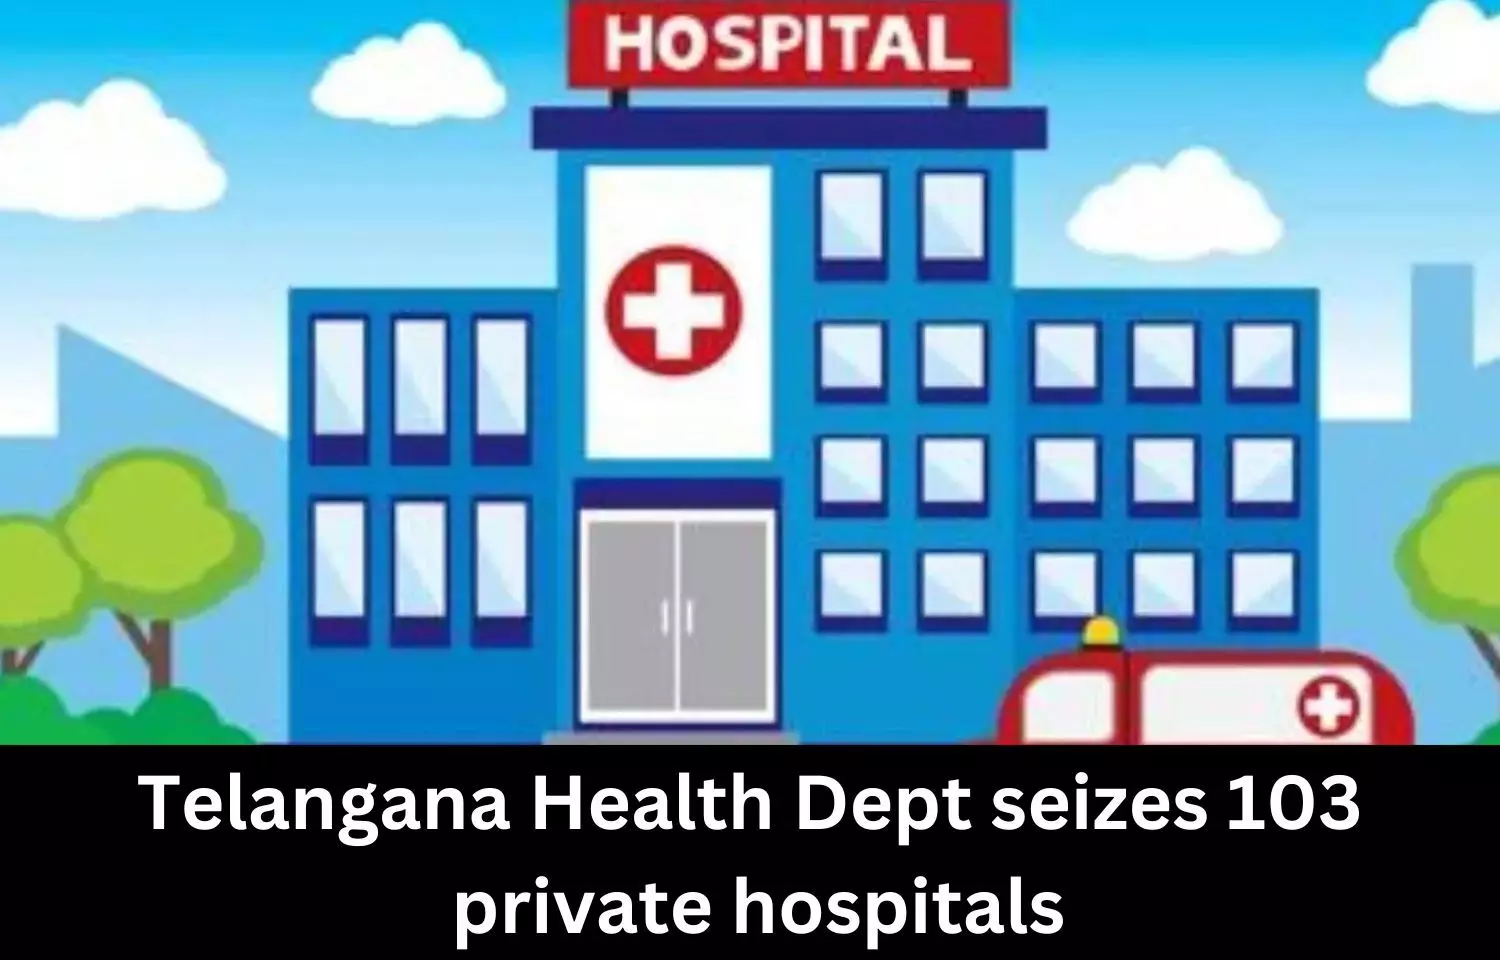 Health Department of Telangana seizes 103 private hospitals, issues notice to 633